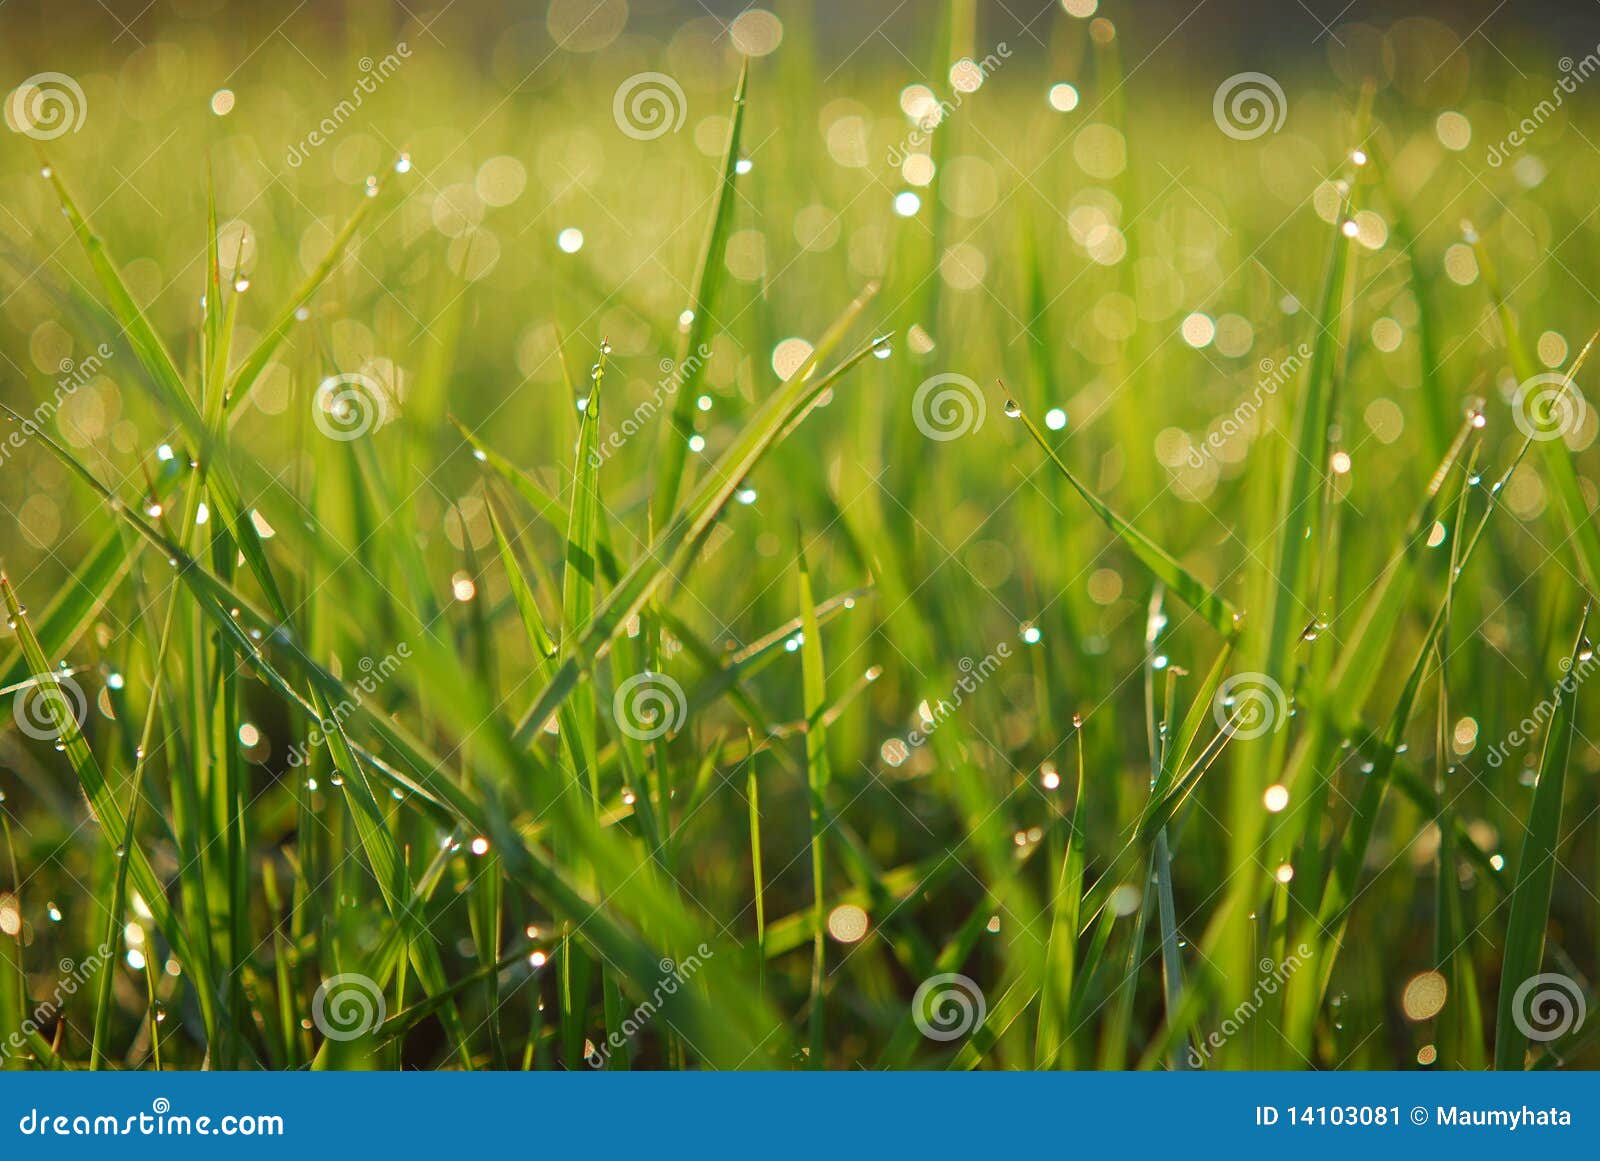 Dewy Green Grass Background Stock Image - Image of details, moist: 14103081